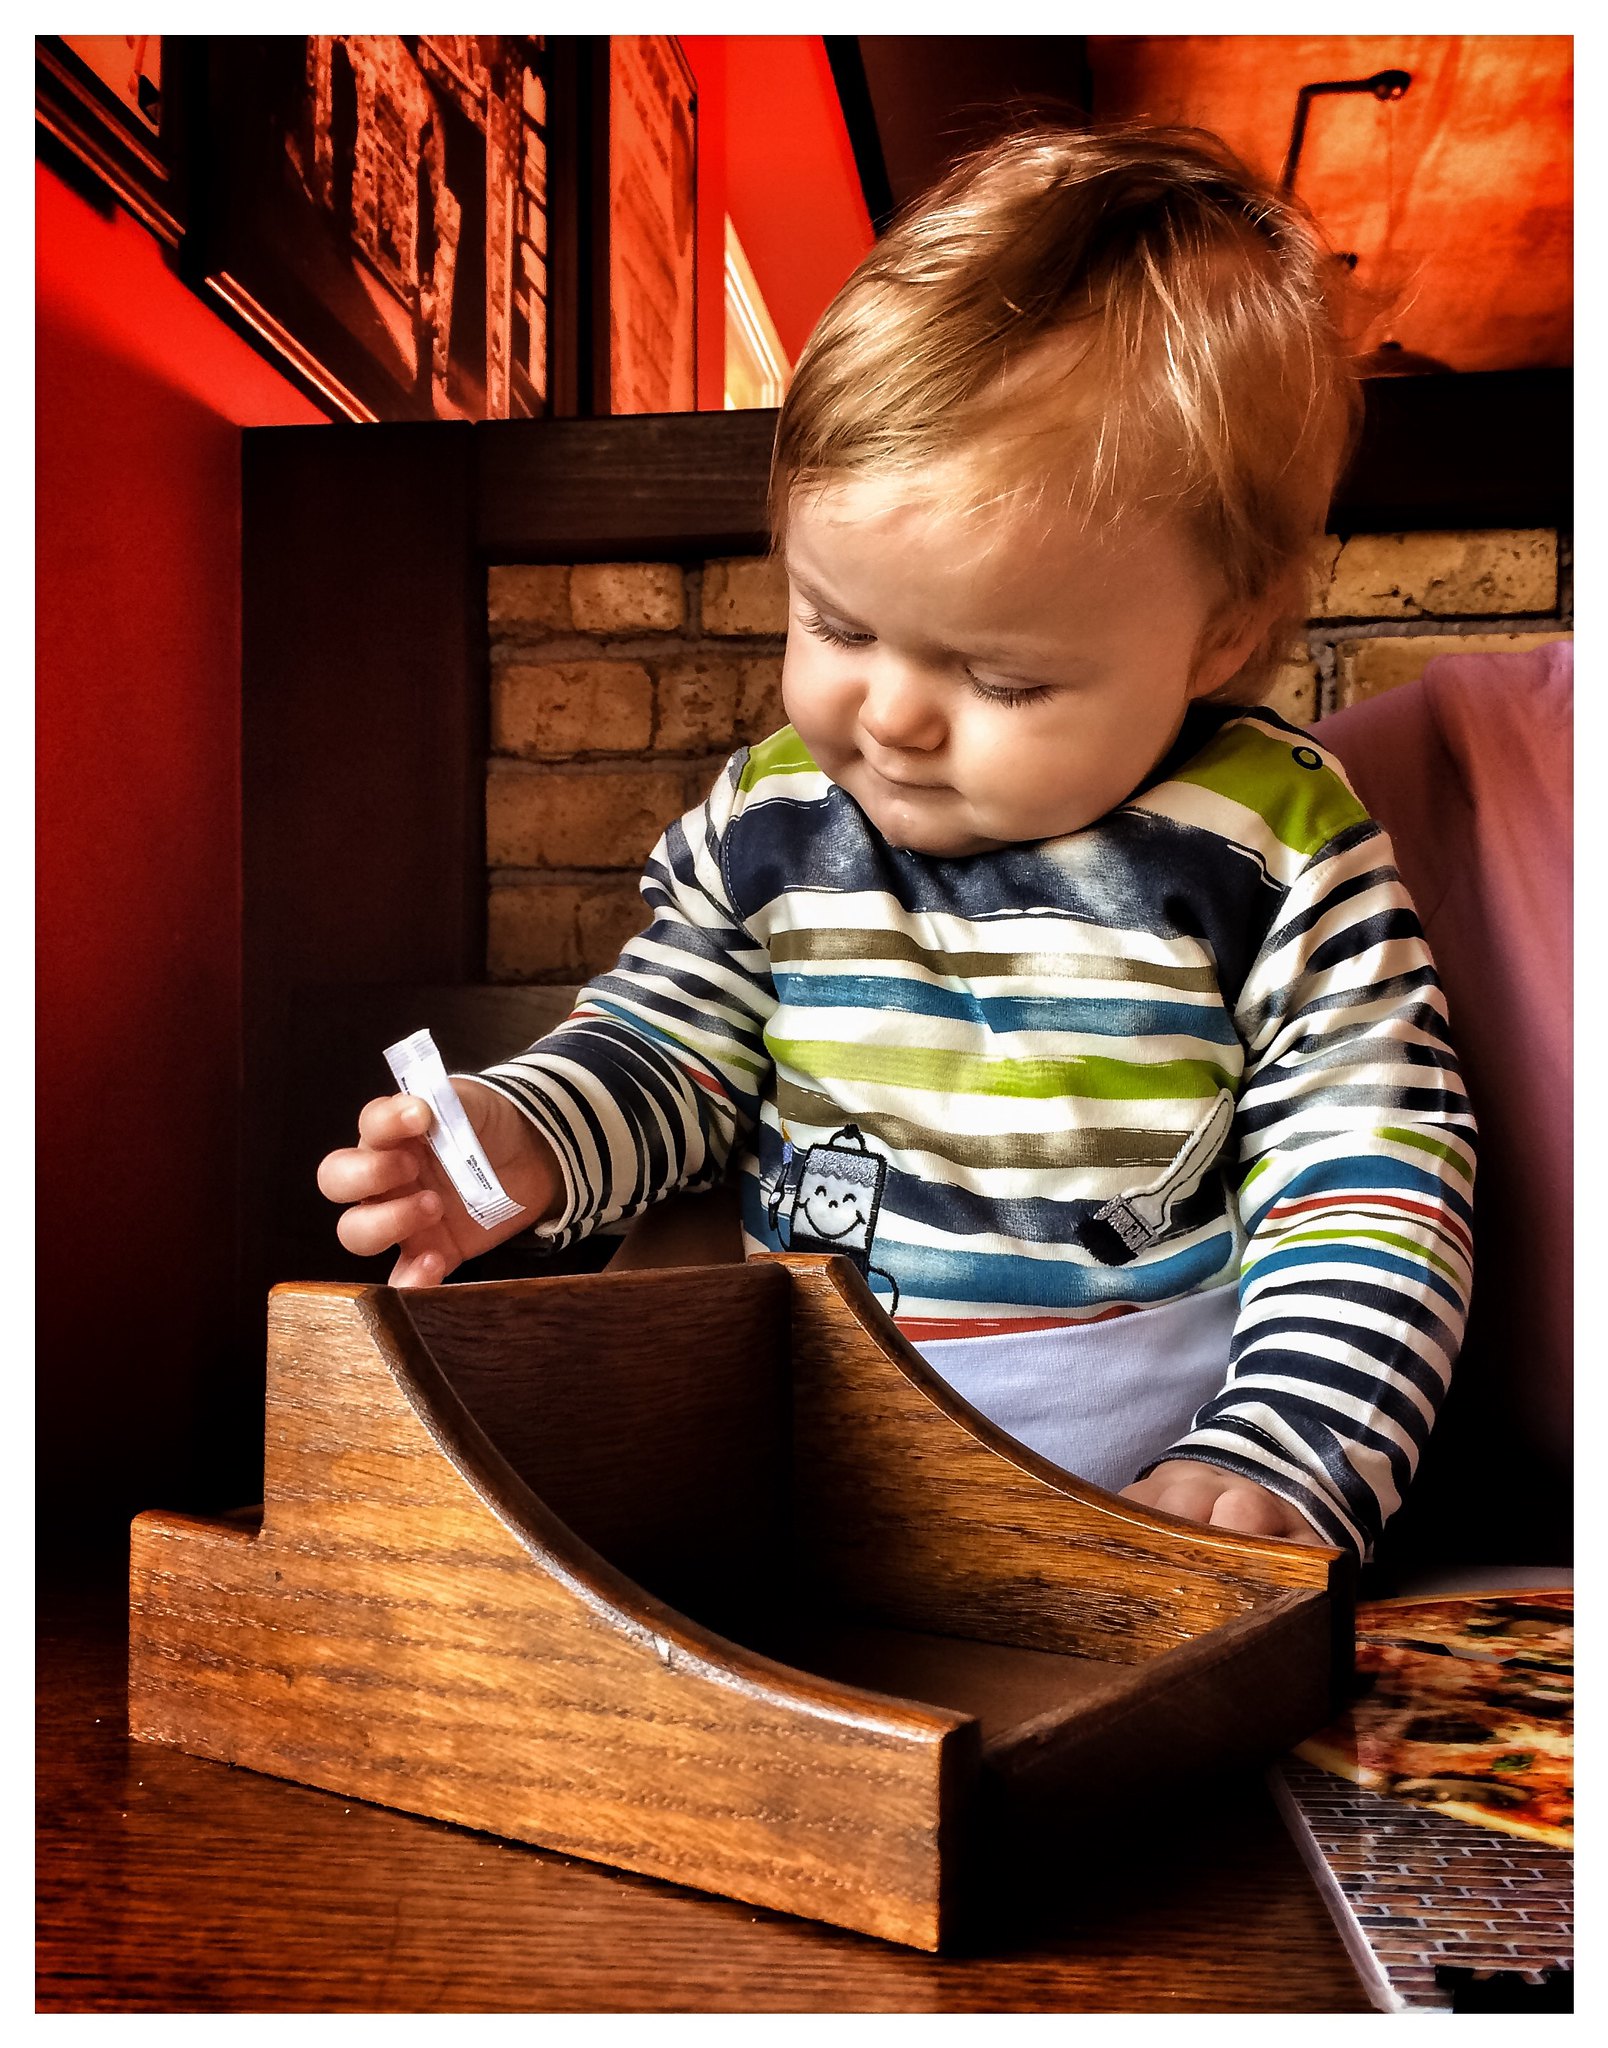 A little boy playing with a sugar sachet in a restaurant | Source: Flickr